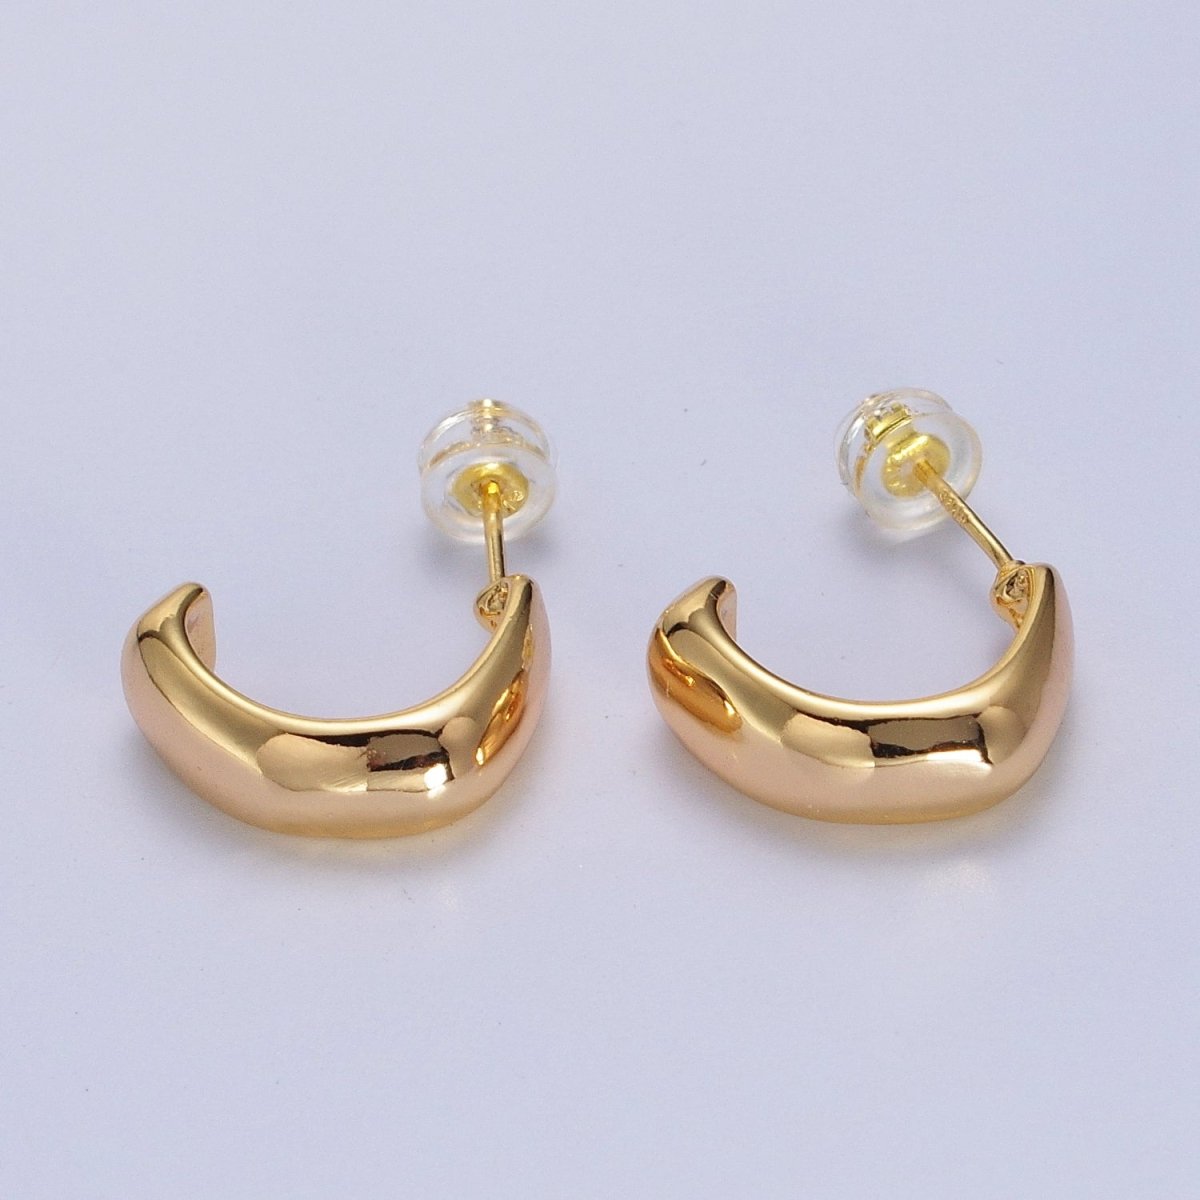 Geometric Abstract Gold Curved Stud Hoops Earrings | AB021 - DLUXCA